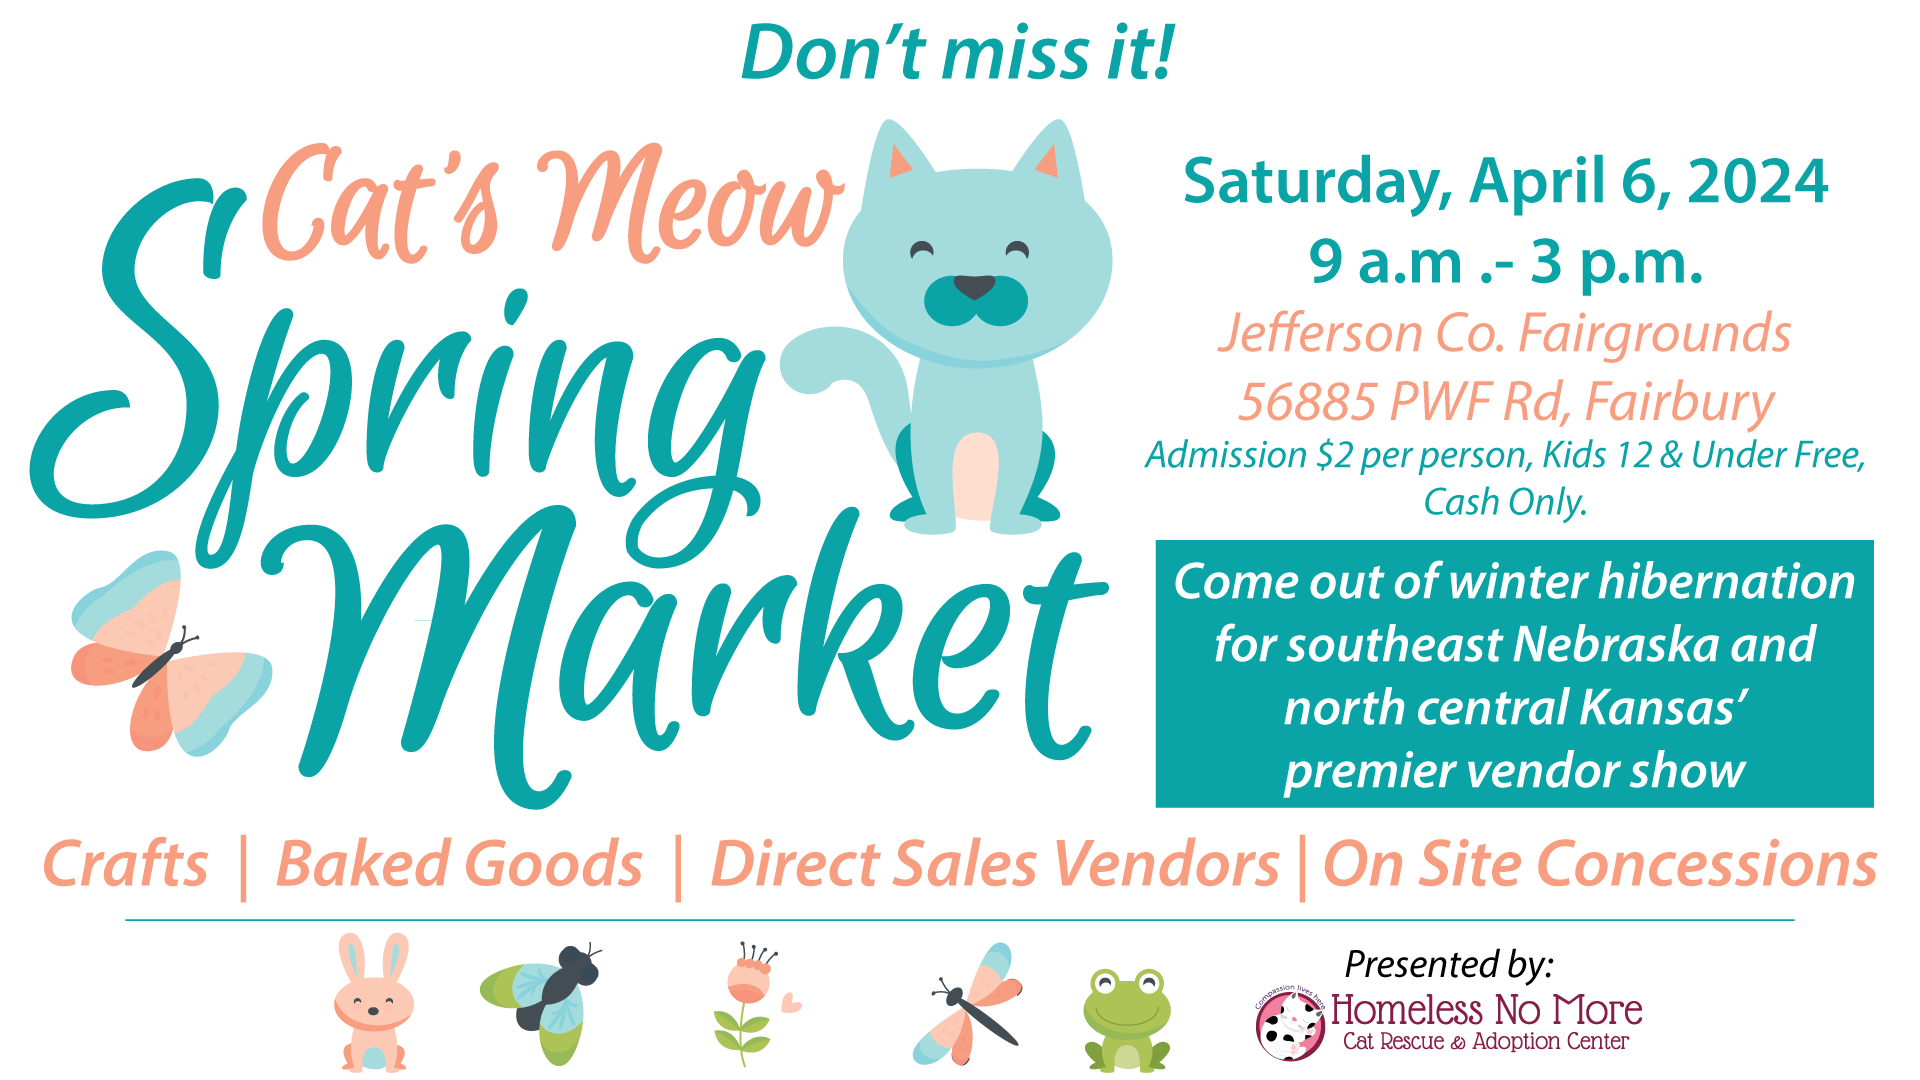 Cat's Meow Spring Market, Saturday, April 6, 2024 from 9 a.m. to 3 p.m. at the Jefferson County Fairgrounds in Fairbury, NE.